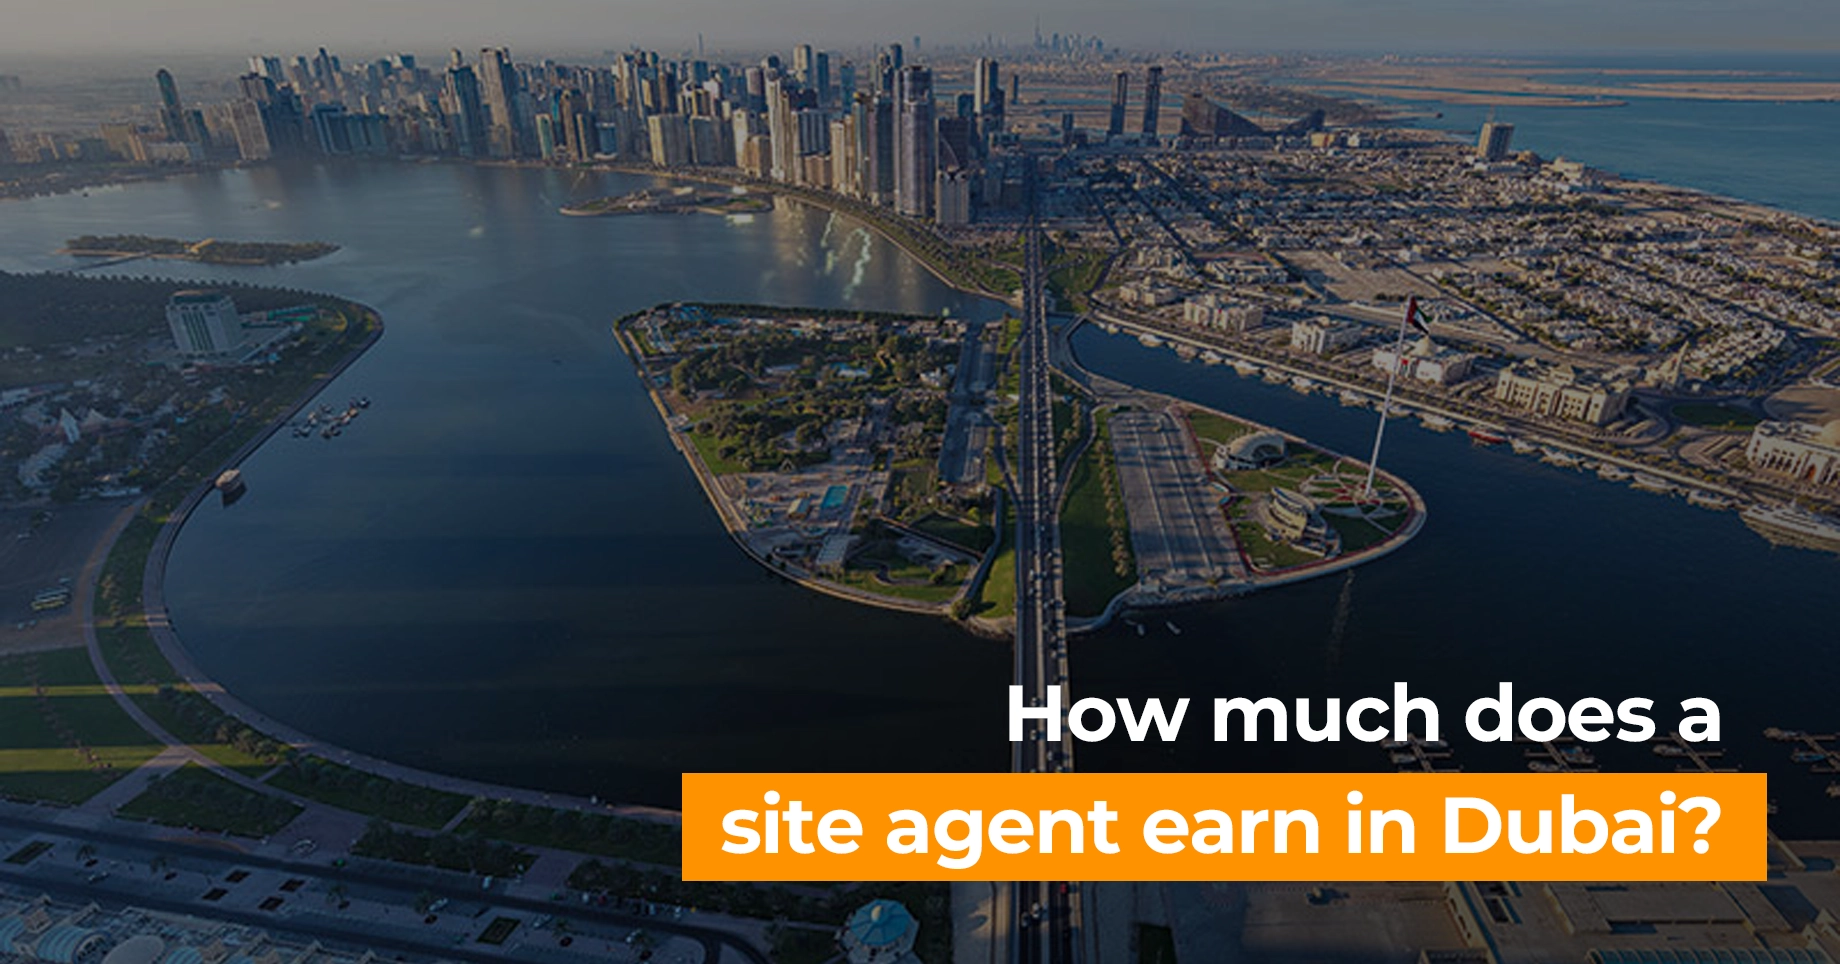 How much does a site agent earn in Dubai